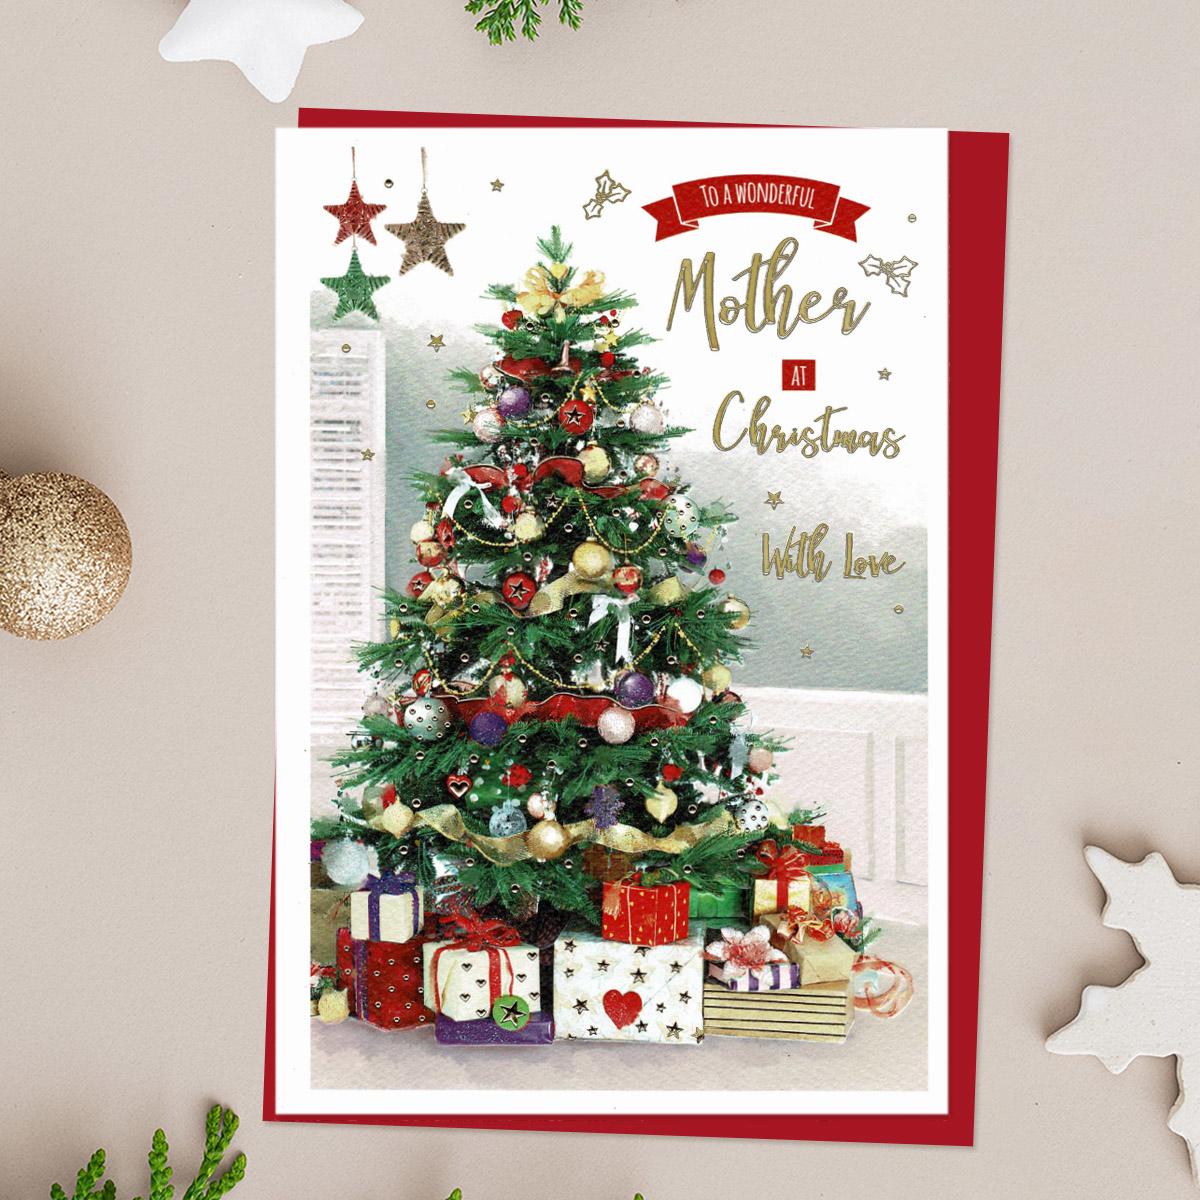 Wonderful Mother At Christmas With Love Card Front Image